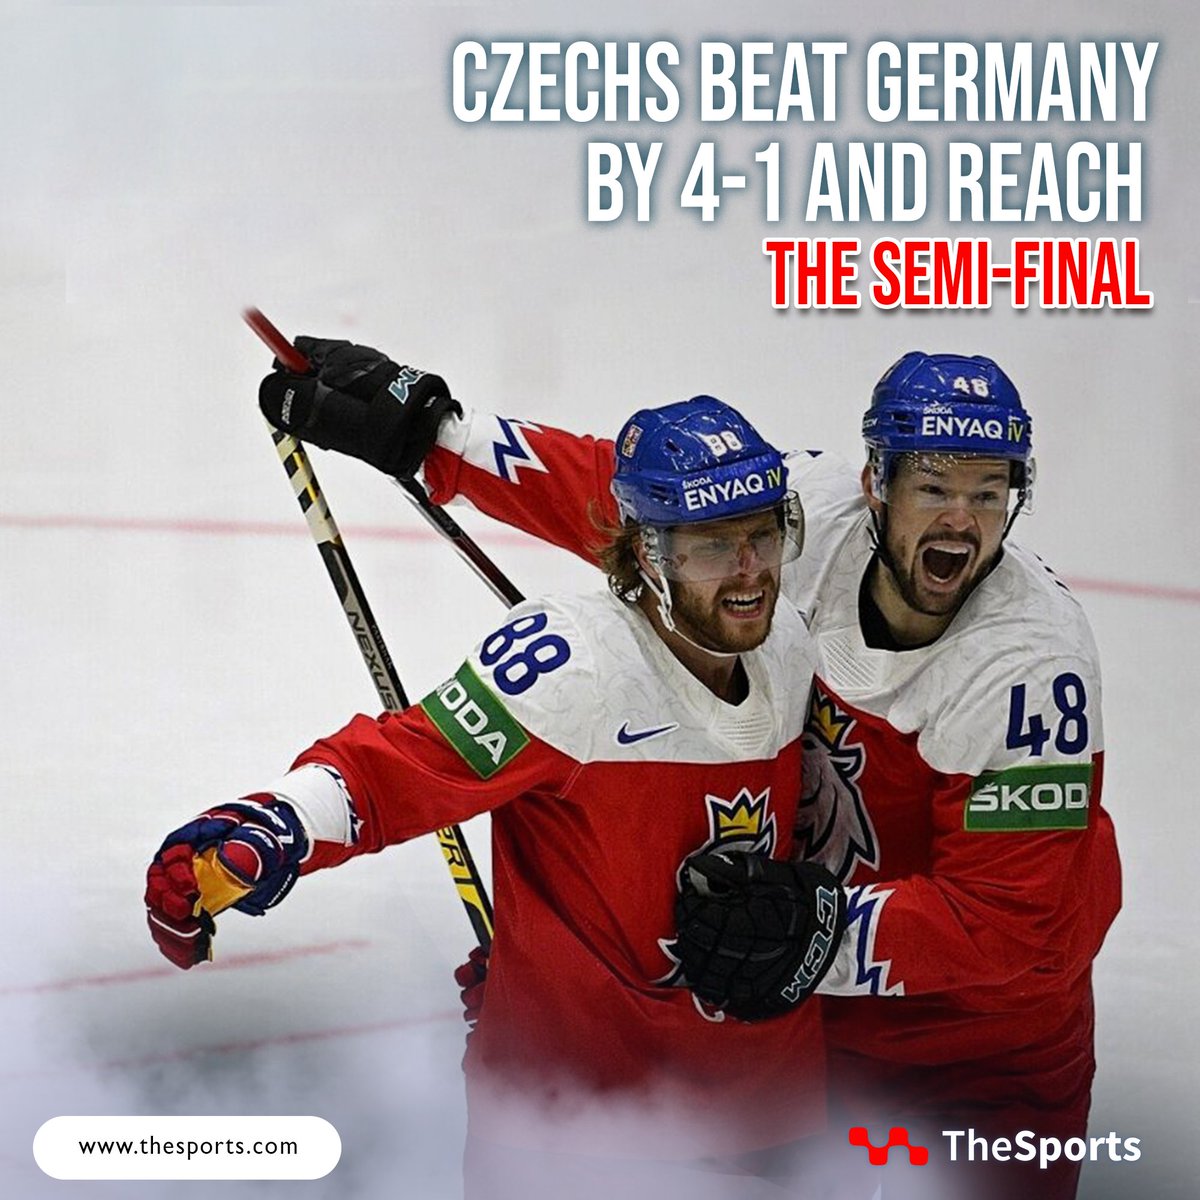 The #Czech National Ice Hockey Team beat #Germany 4:1 on Thursday afternoon in the quarterfinals of the World Championships in #Helsinki, Finland. 

#Czechrepublic #Germany #worldchampionship #thesports #icehockey #goalie #hockey https://t.co/kF6kDzY46Q